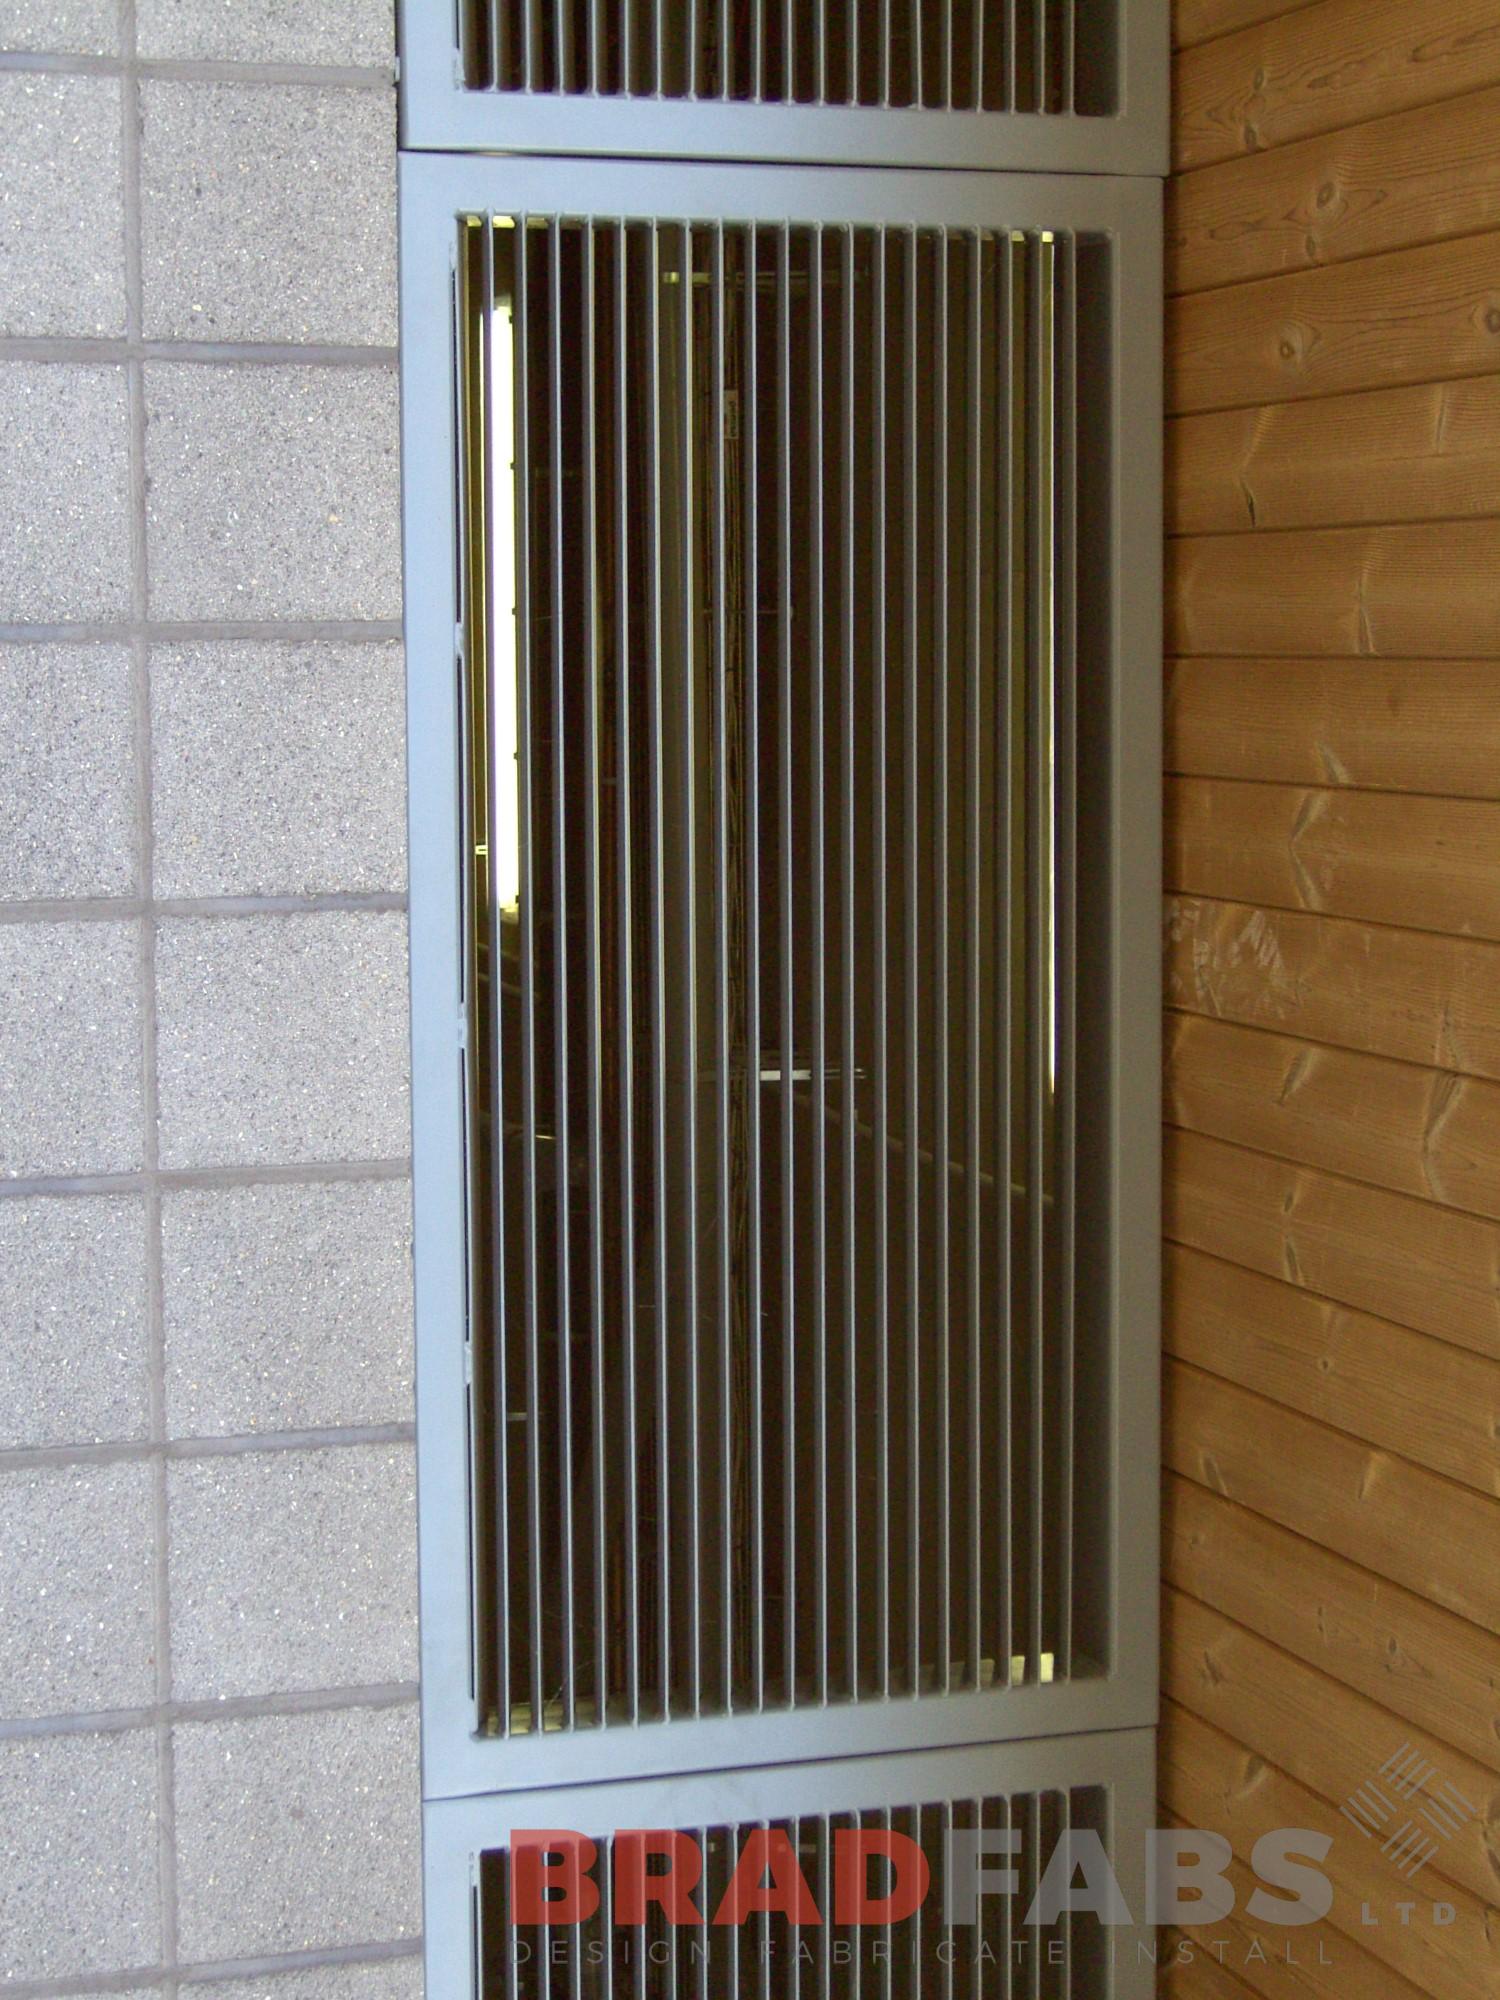 steel louvre grills to provide ventillation and light